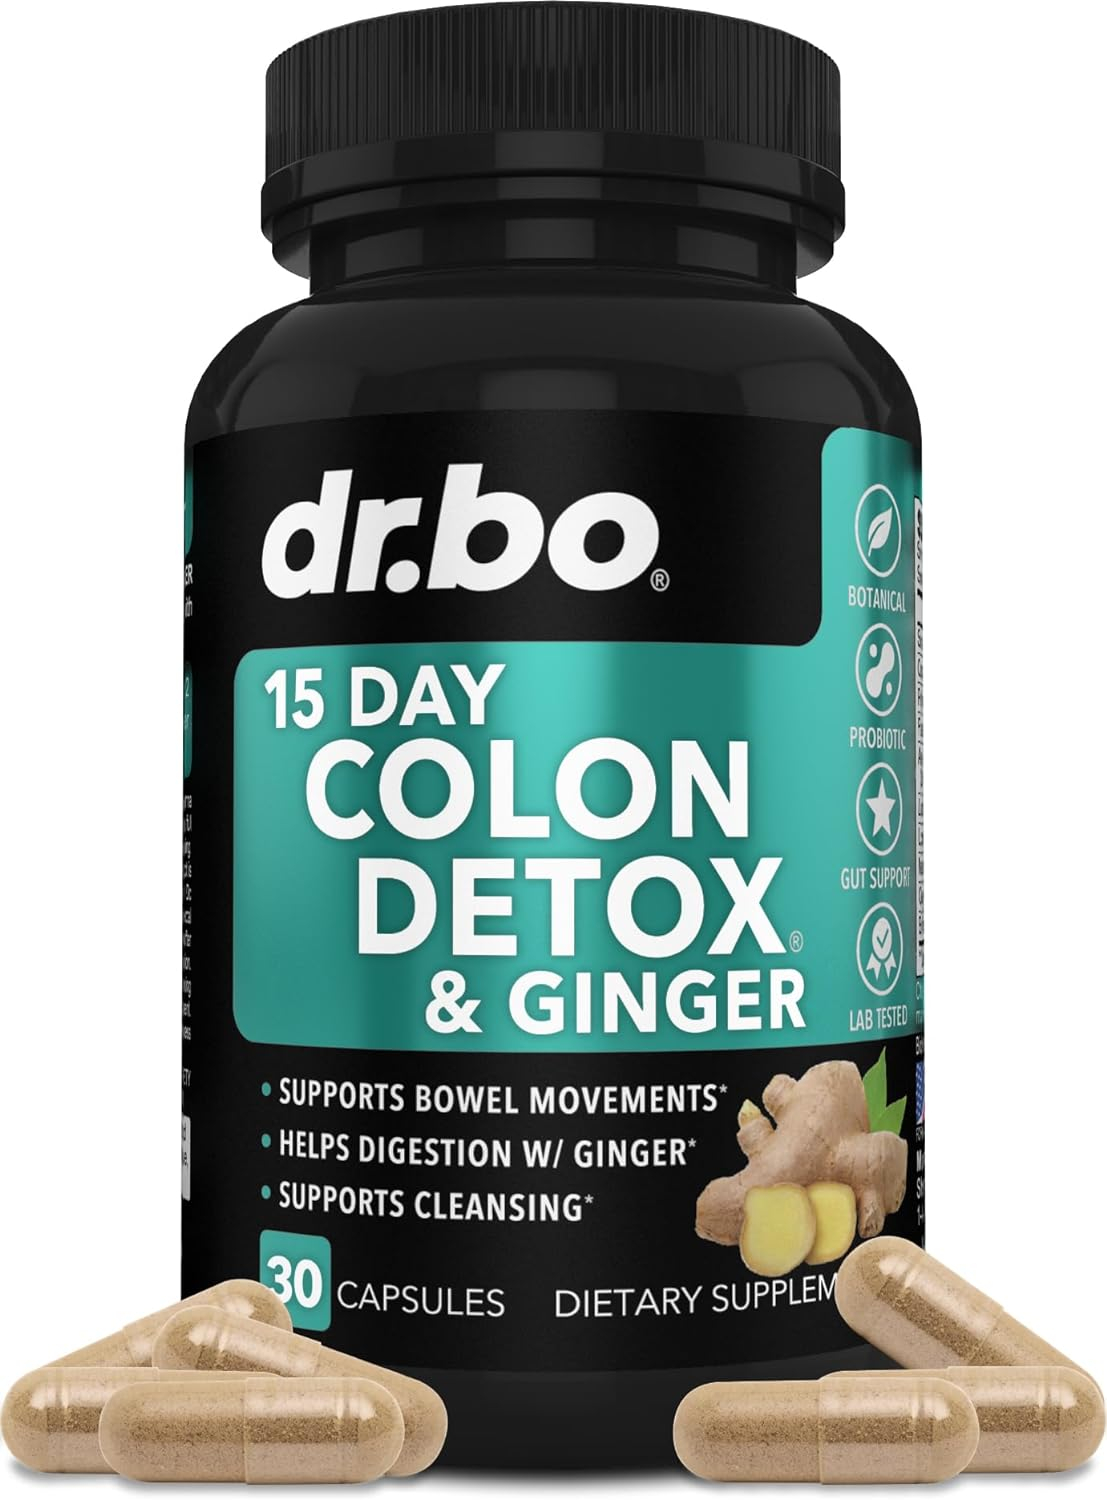 Colon Cleanser Detox for Weight Flush - 15 Day Colon Cleanse Pills with Ginger - Fast Natural Laxative, Constipation Relief, Bowel Movement Supplements for Intestinal Stomach Bloating Gut Loss Support